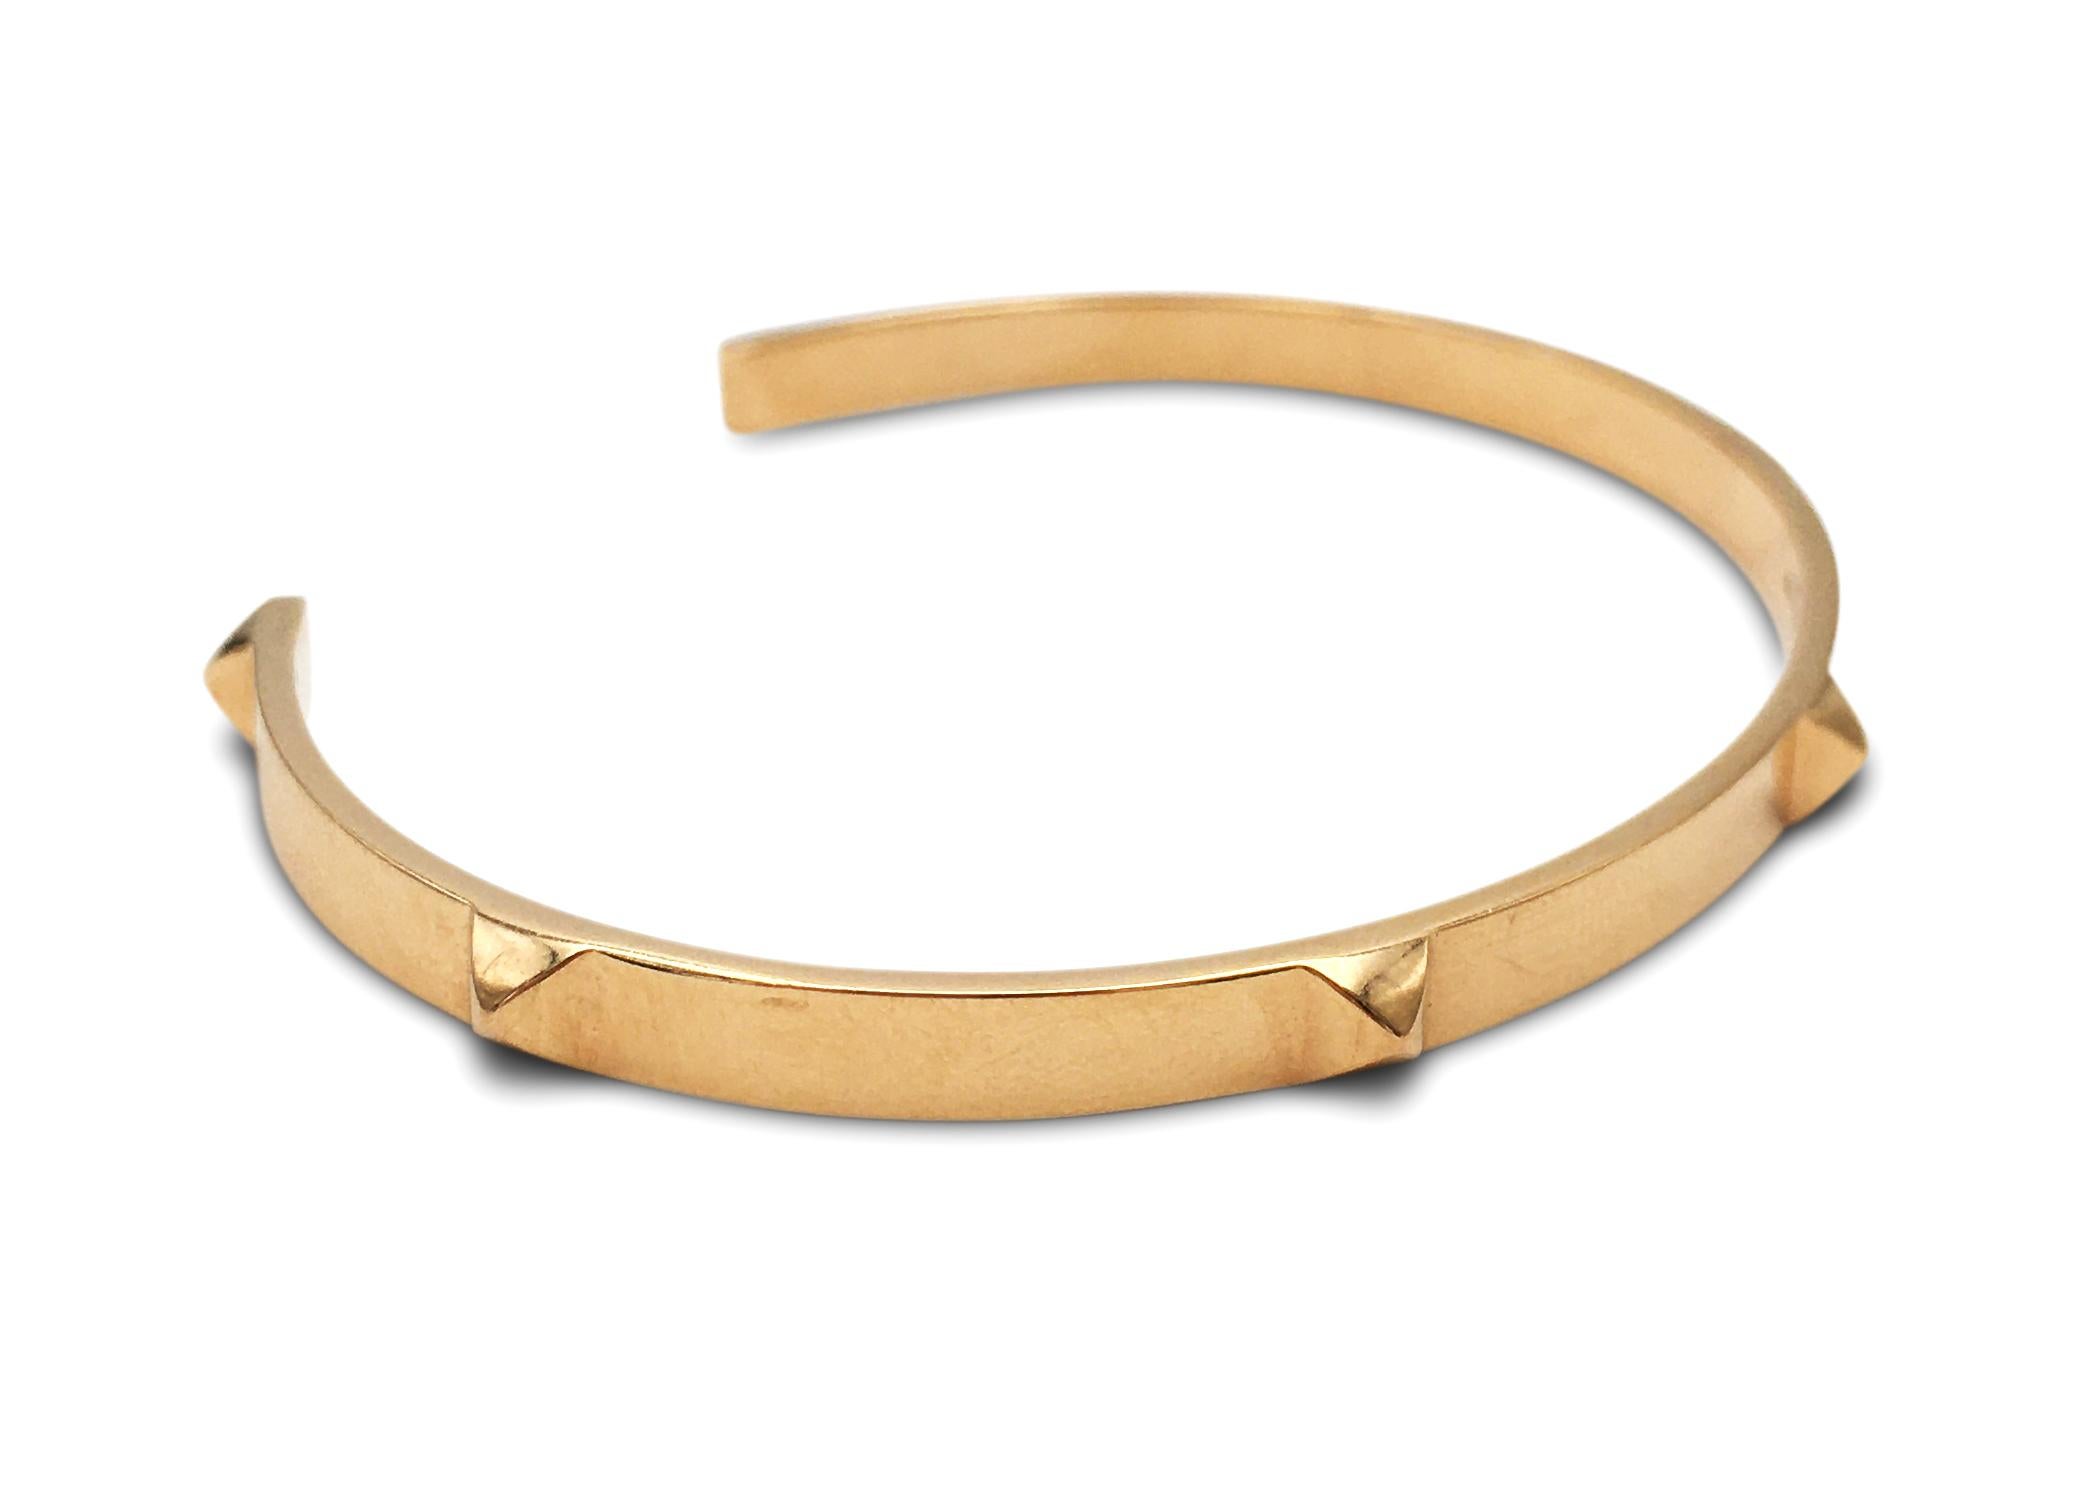 Authentic Hermes bangle bracelet made in 18 karat rose gold.  CIRCA 2010's. This elegant bracelet features 7 four-sided domed studs and can fit up to a size 6 1/2 wrist.  The bracelet is accompanied by its original Hermes box.